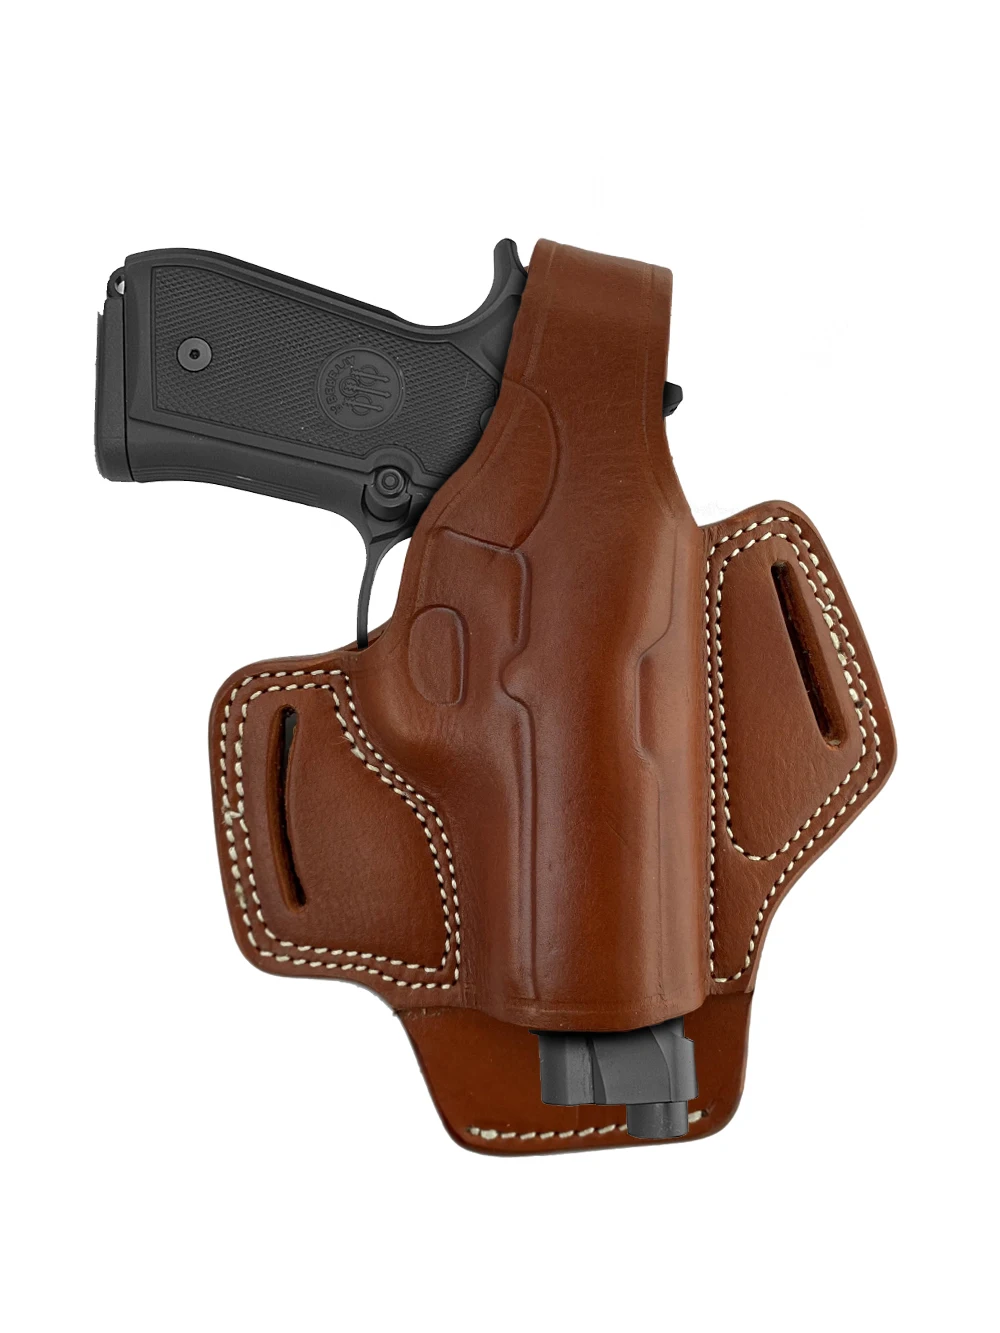 

Leather Gun Holster For Beretta F81 Protected Barrel Owb Carry Two Slot Thumb Break Handmade Pistol Pouch Firearm Weapon Cover